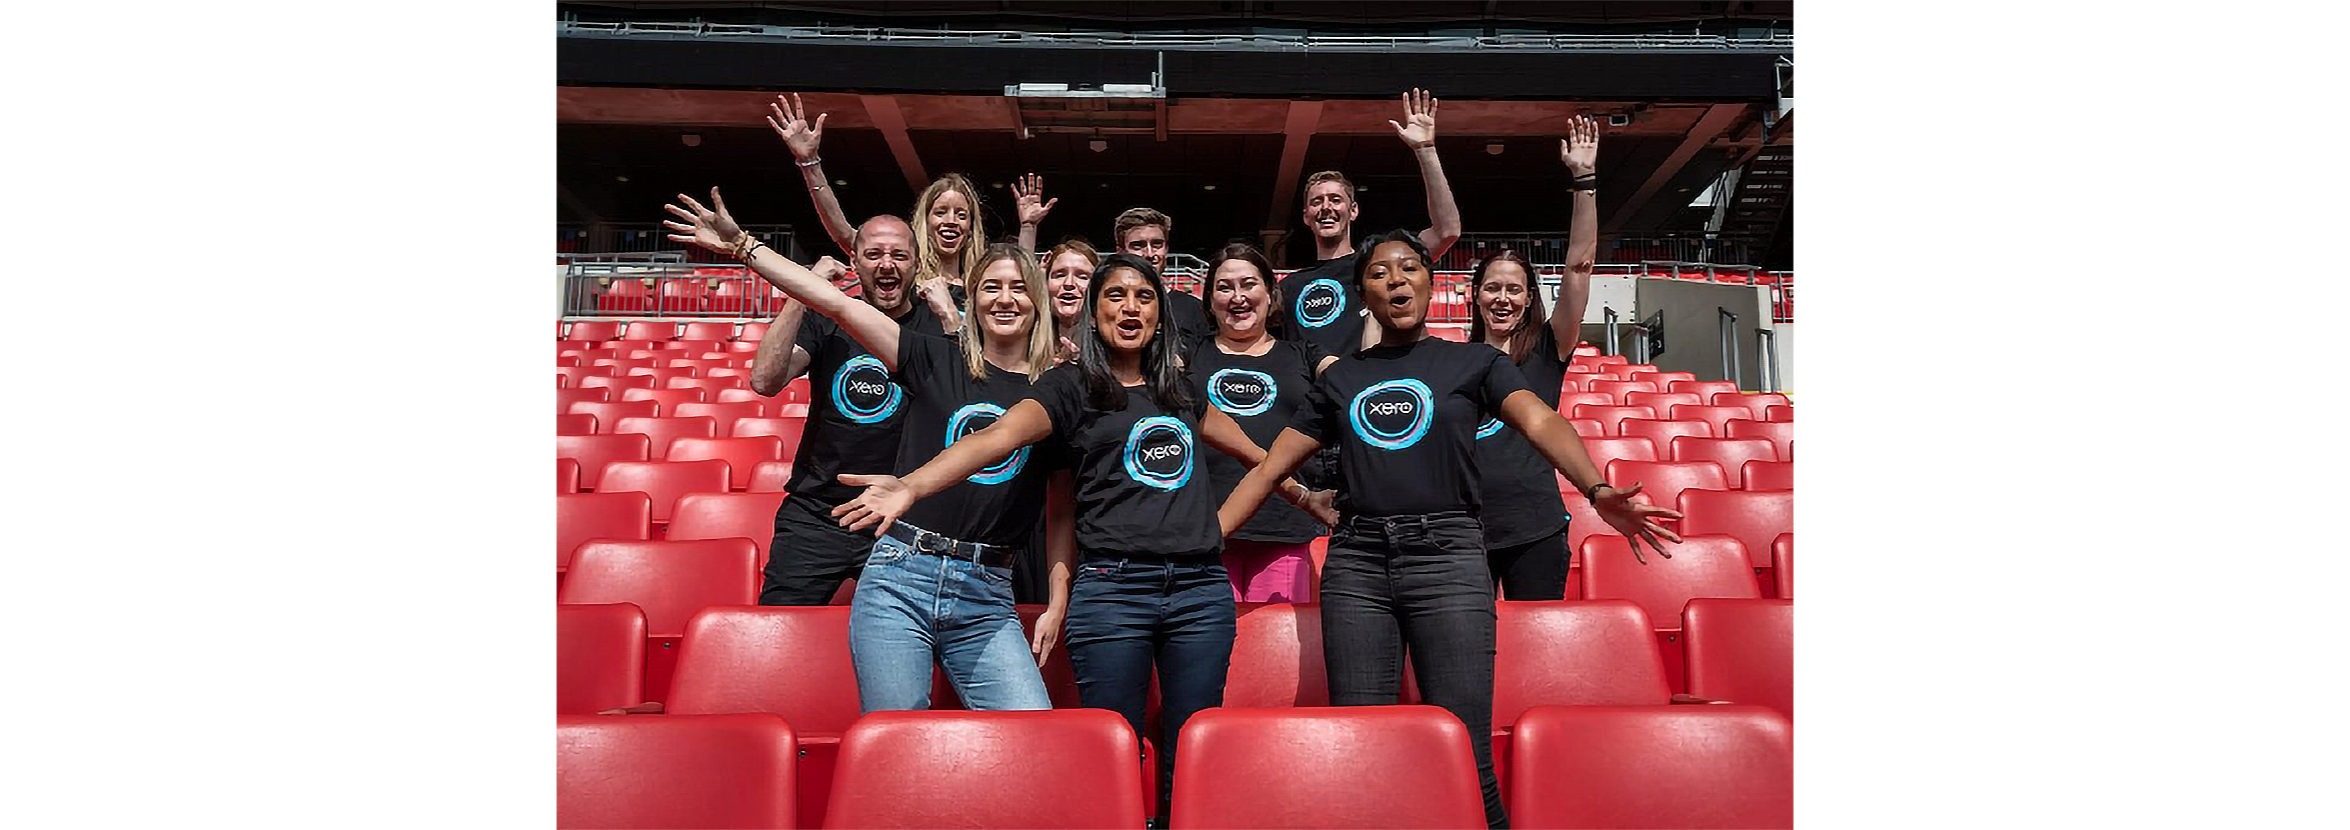 A group of employees in Xero t-shirts pose for the camera, with arms outstretched, in a large events arena.